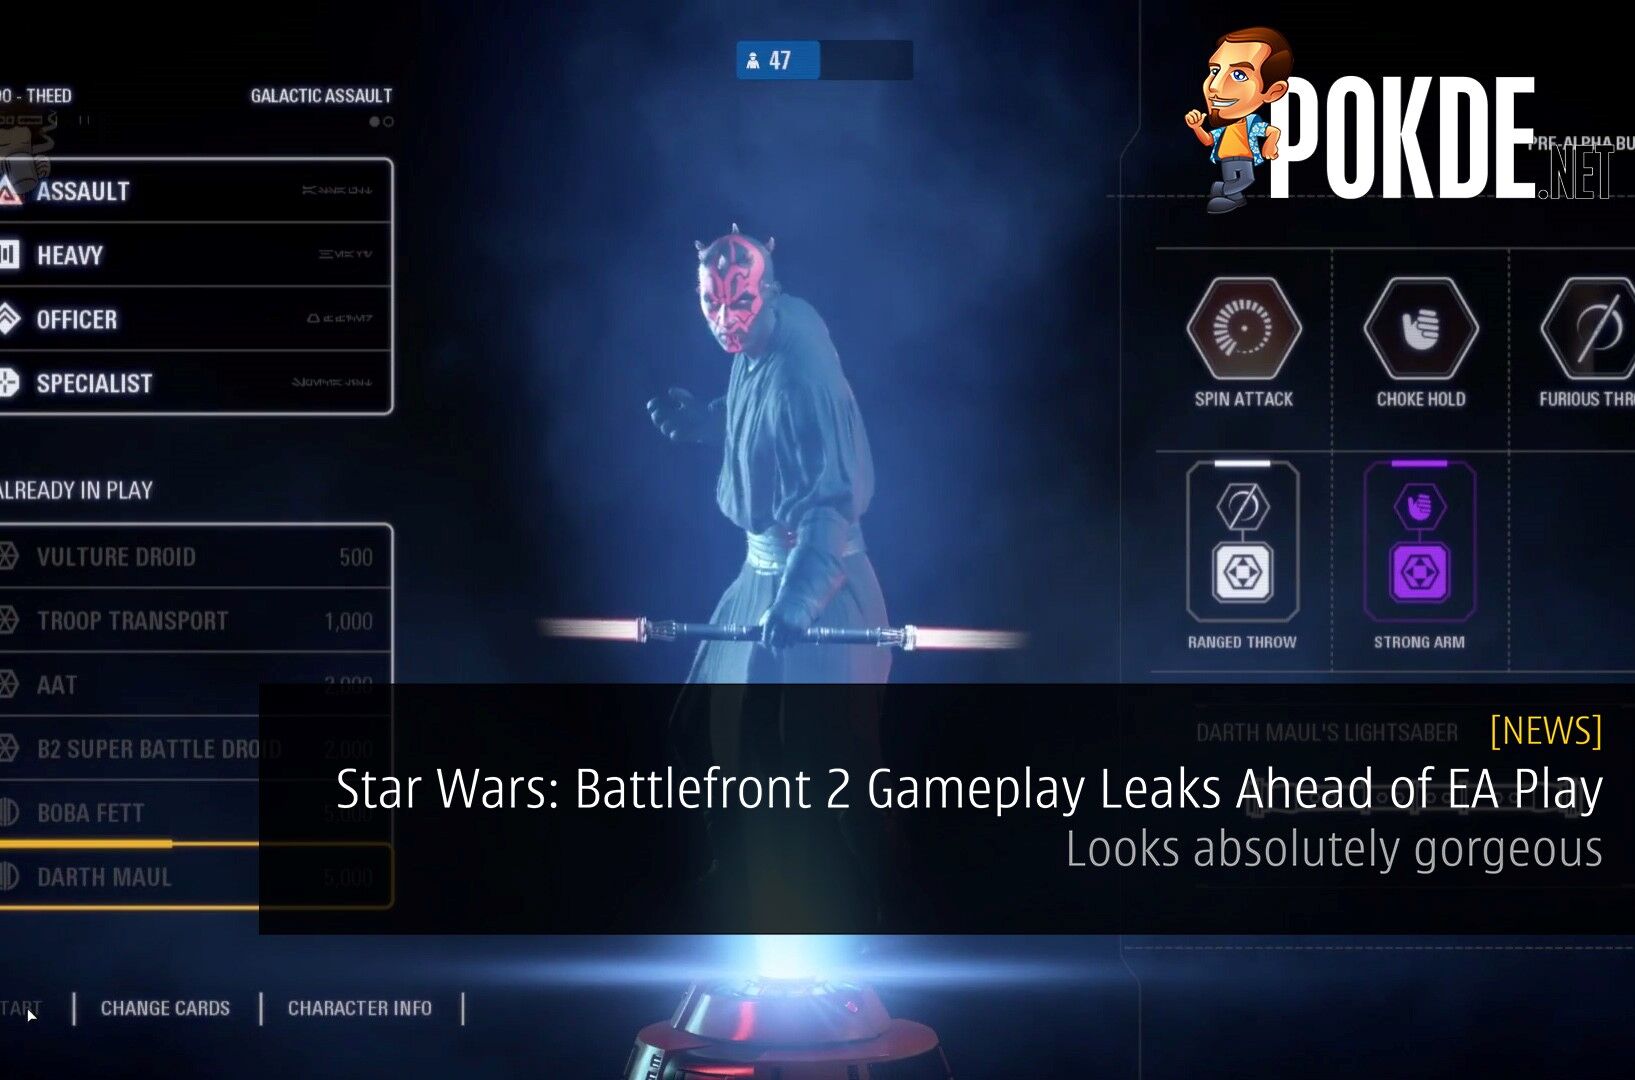 Star Wars: Battlefront 2 Gameplay Leaks Ahead of EA Play - Looks absolutely gorgeous 29